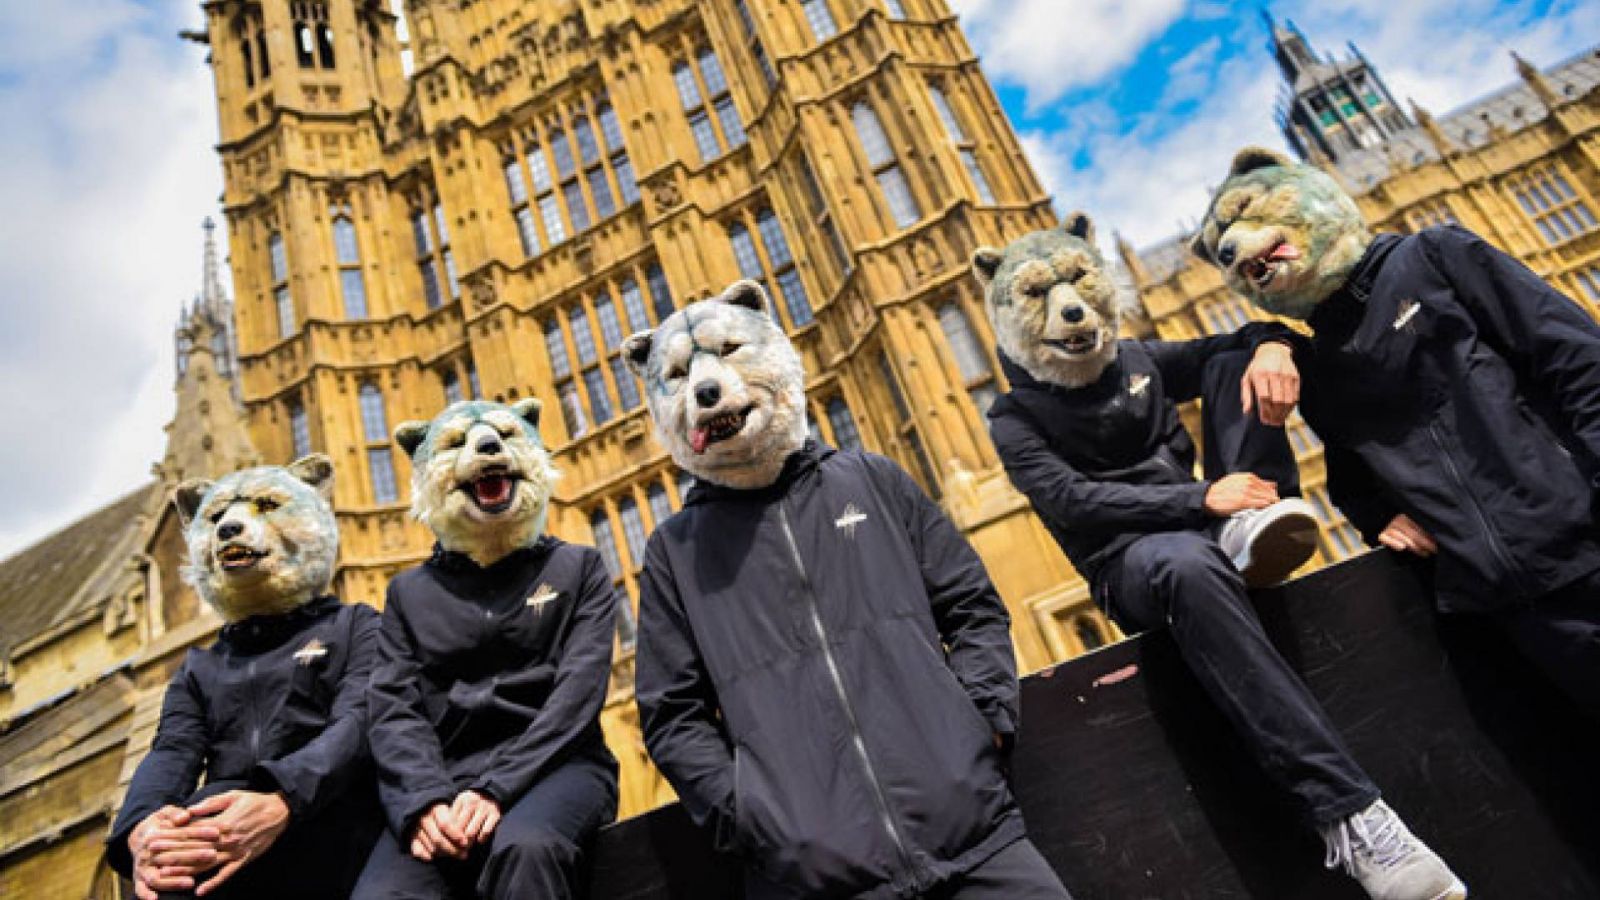 Álbum de MAN WITH A MISSION disponible en 25 países © MAN WITH A MISSION. All rights reserved.